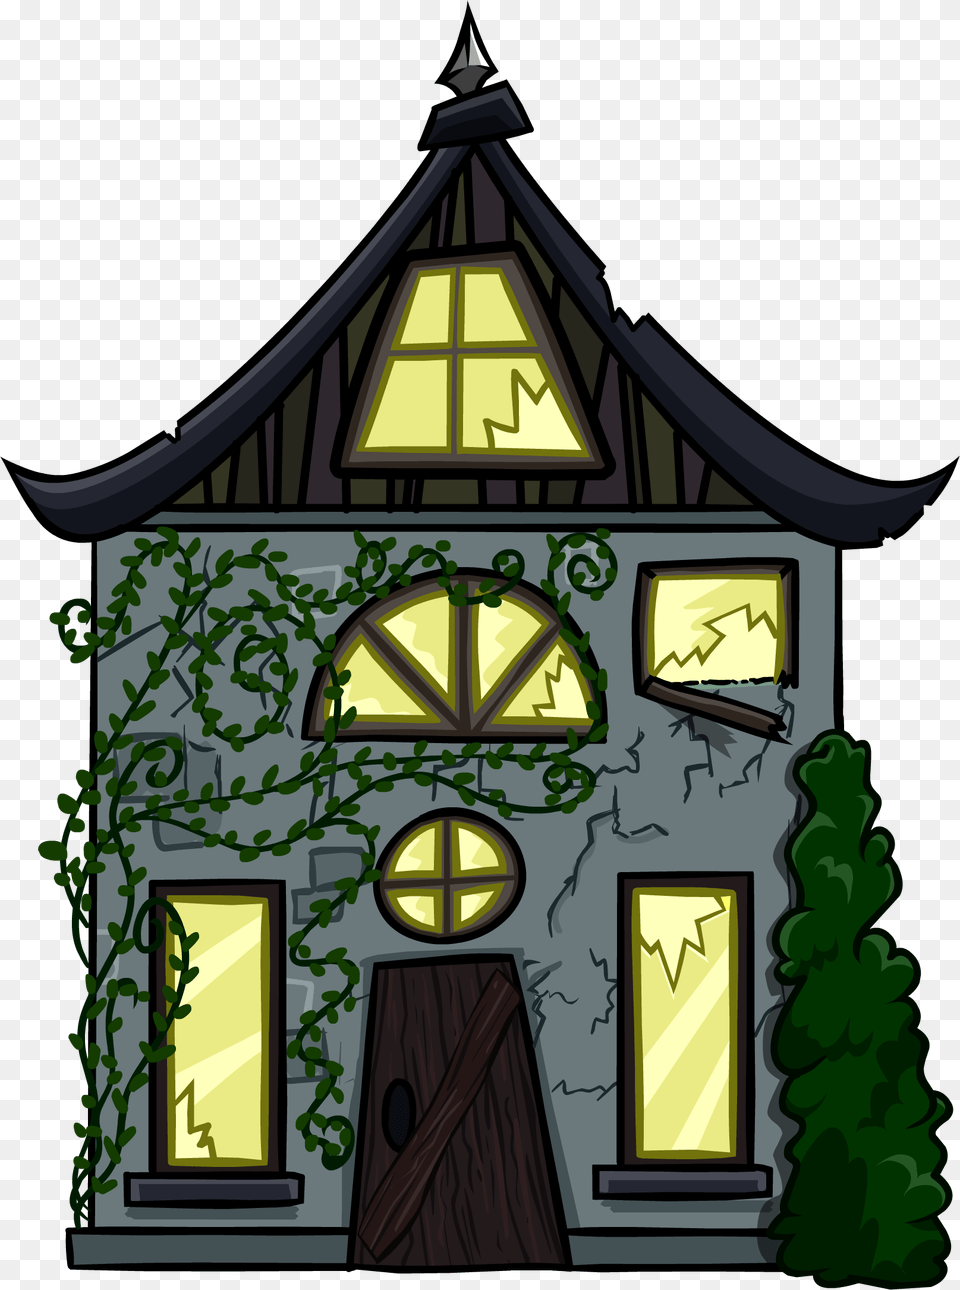 Cottage Clipart Creepy Club Penguin Creepy Cottage, Architecture, Building, Clock Tower, Tower Png